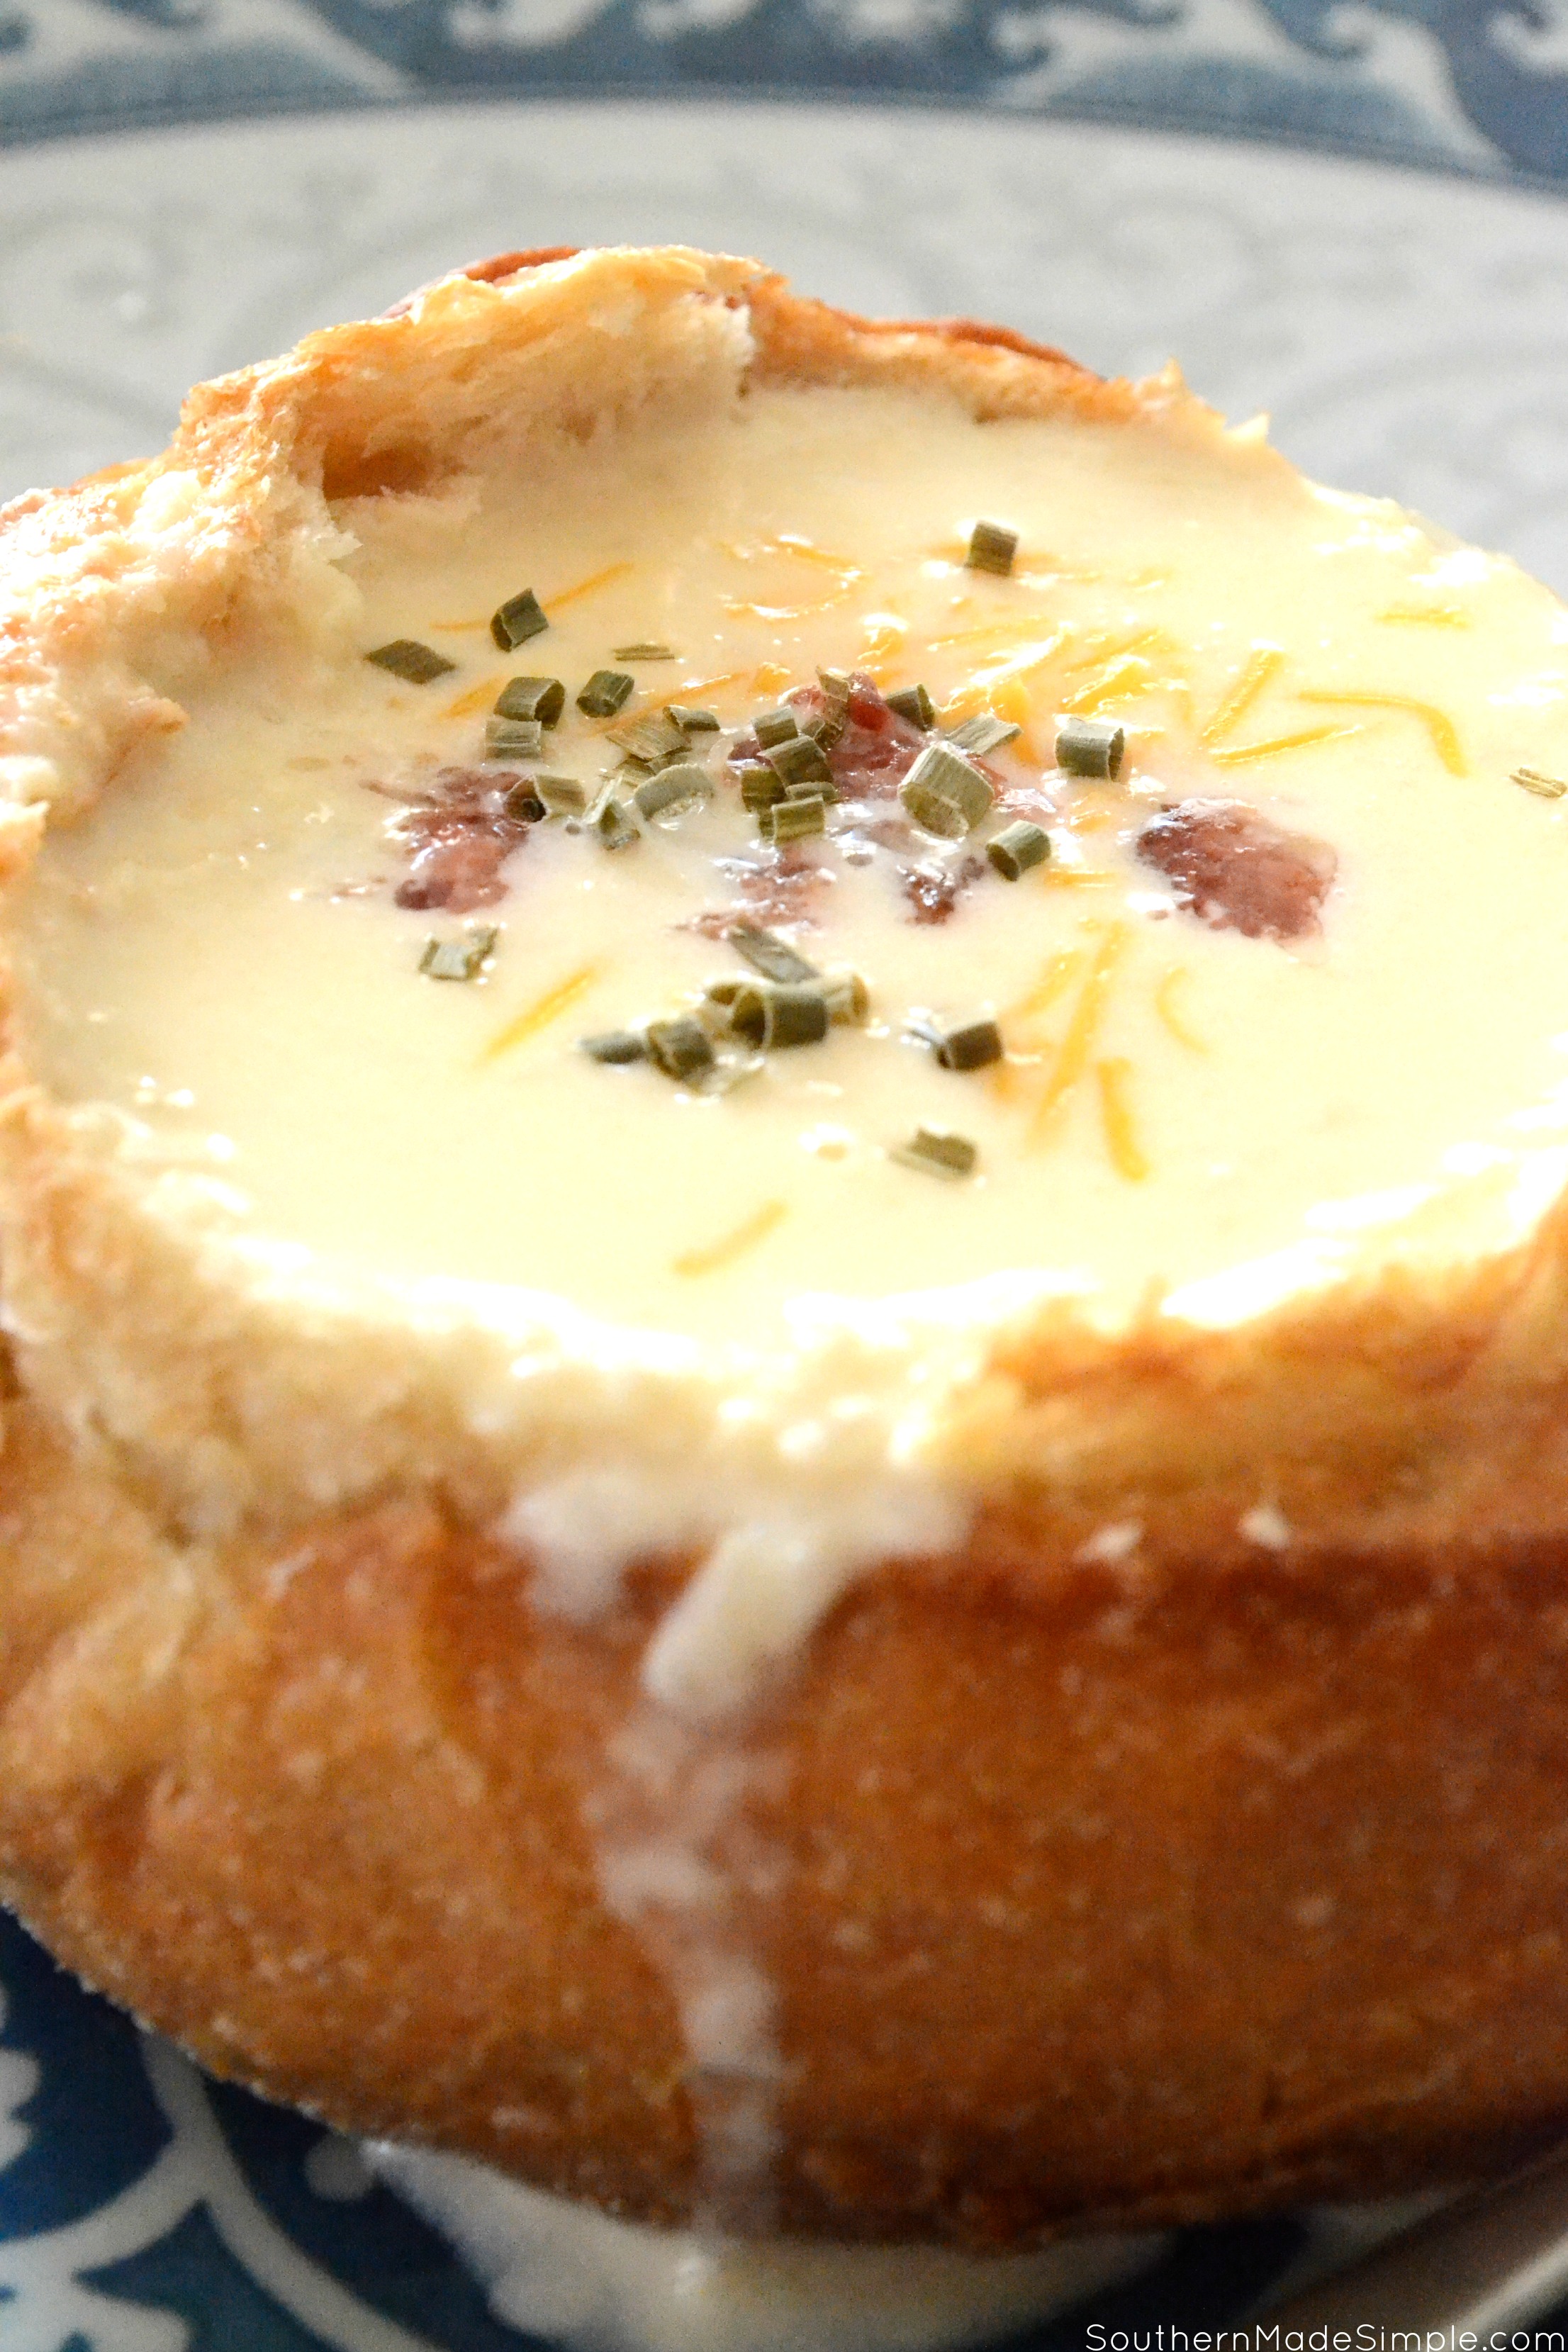 During the busy holiday season, it's easy to lose track of time and need a hot and delicious meal on the fly. This 5 Ingredient Creamy Potato Soup Bread Bowl is the perfect treat to cozy up to on a cold day, and it's ready in 20 minutes! #ad #DairyPureandSimpleHolidays